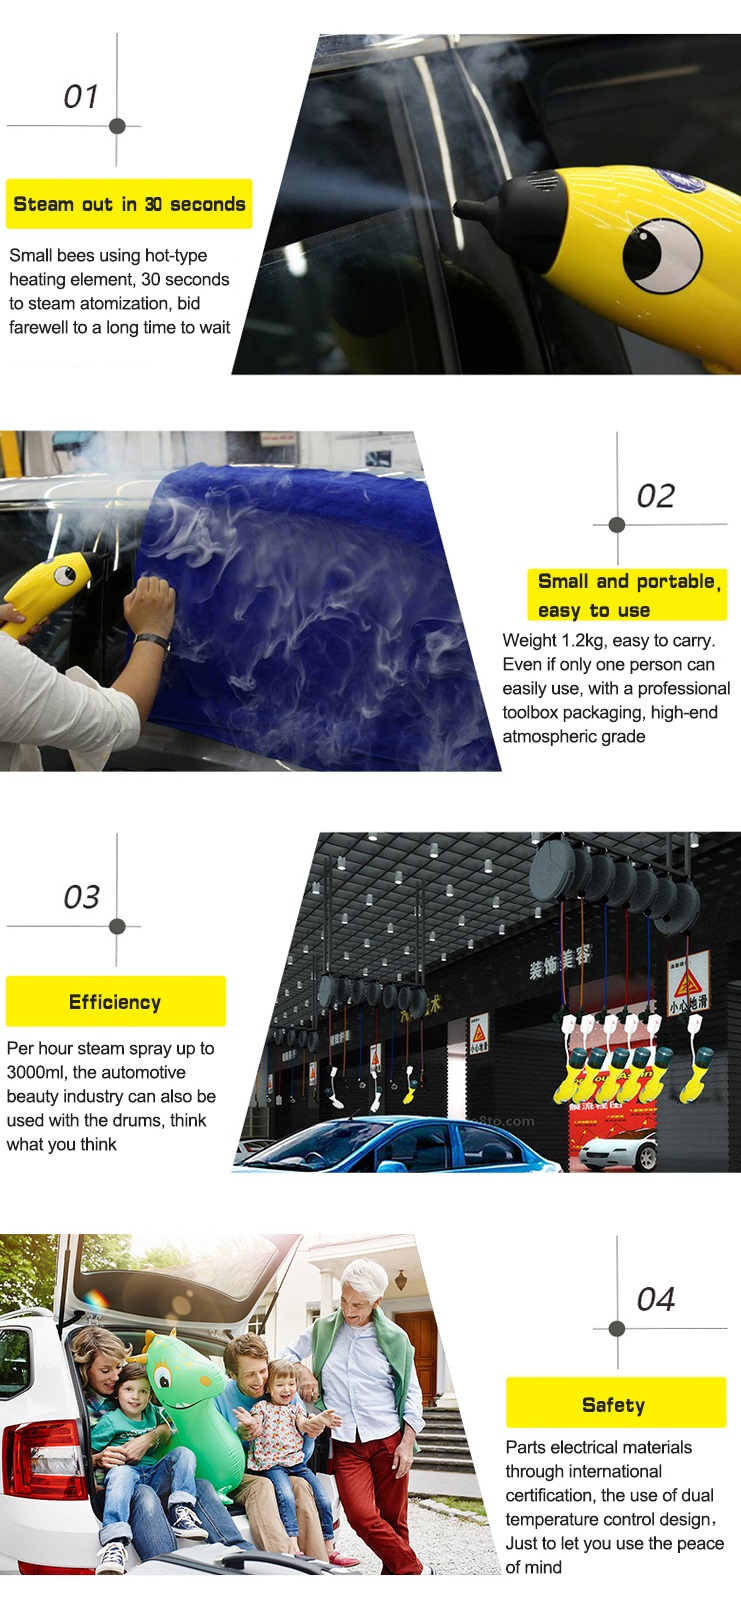 Description of Hand Steam Cleaner from Car Member